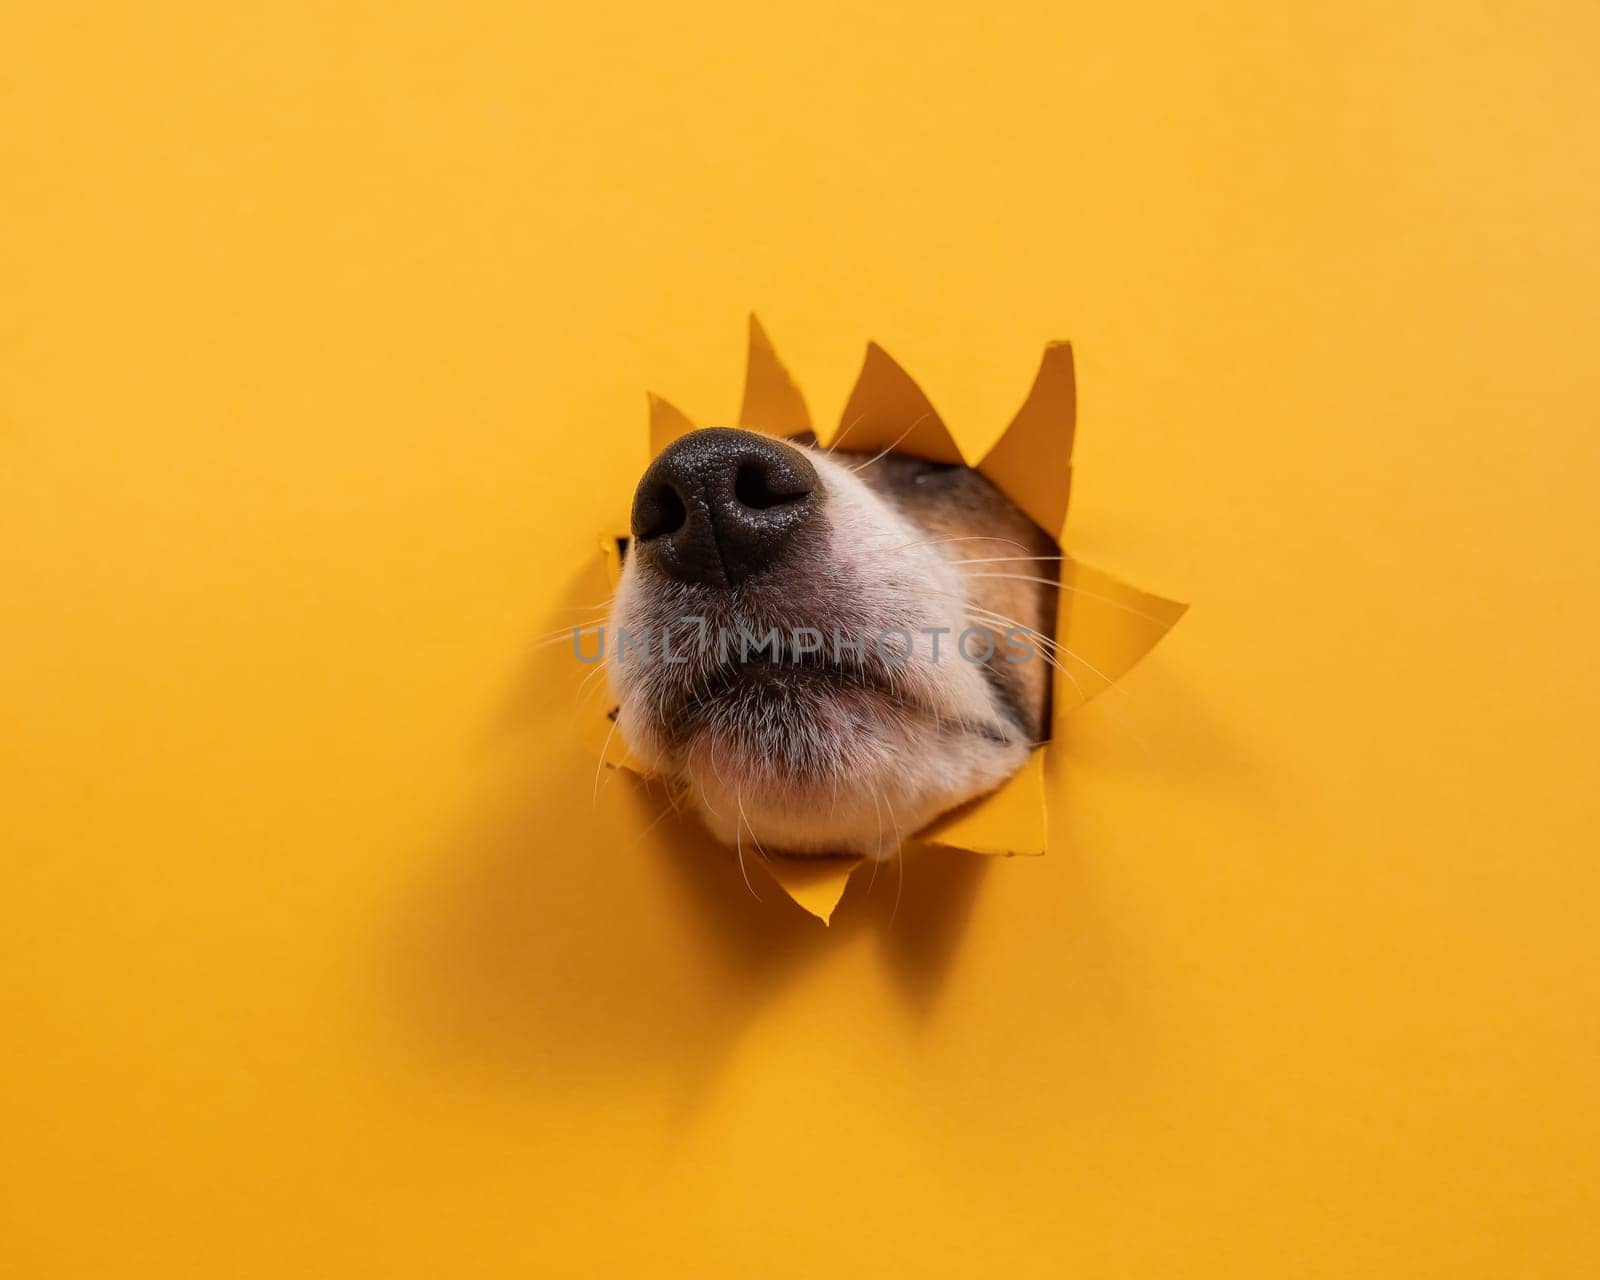 Jack Russell Terrier dog nose sticking out of torn paper orange background